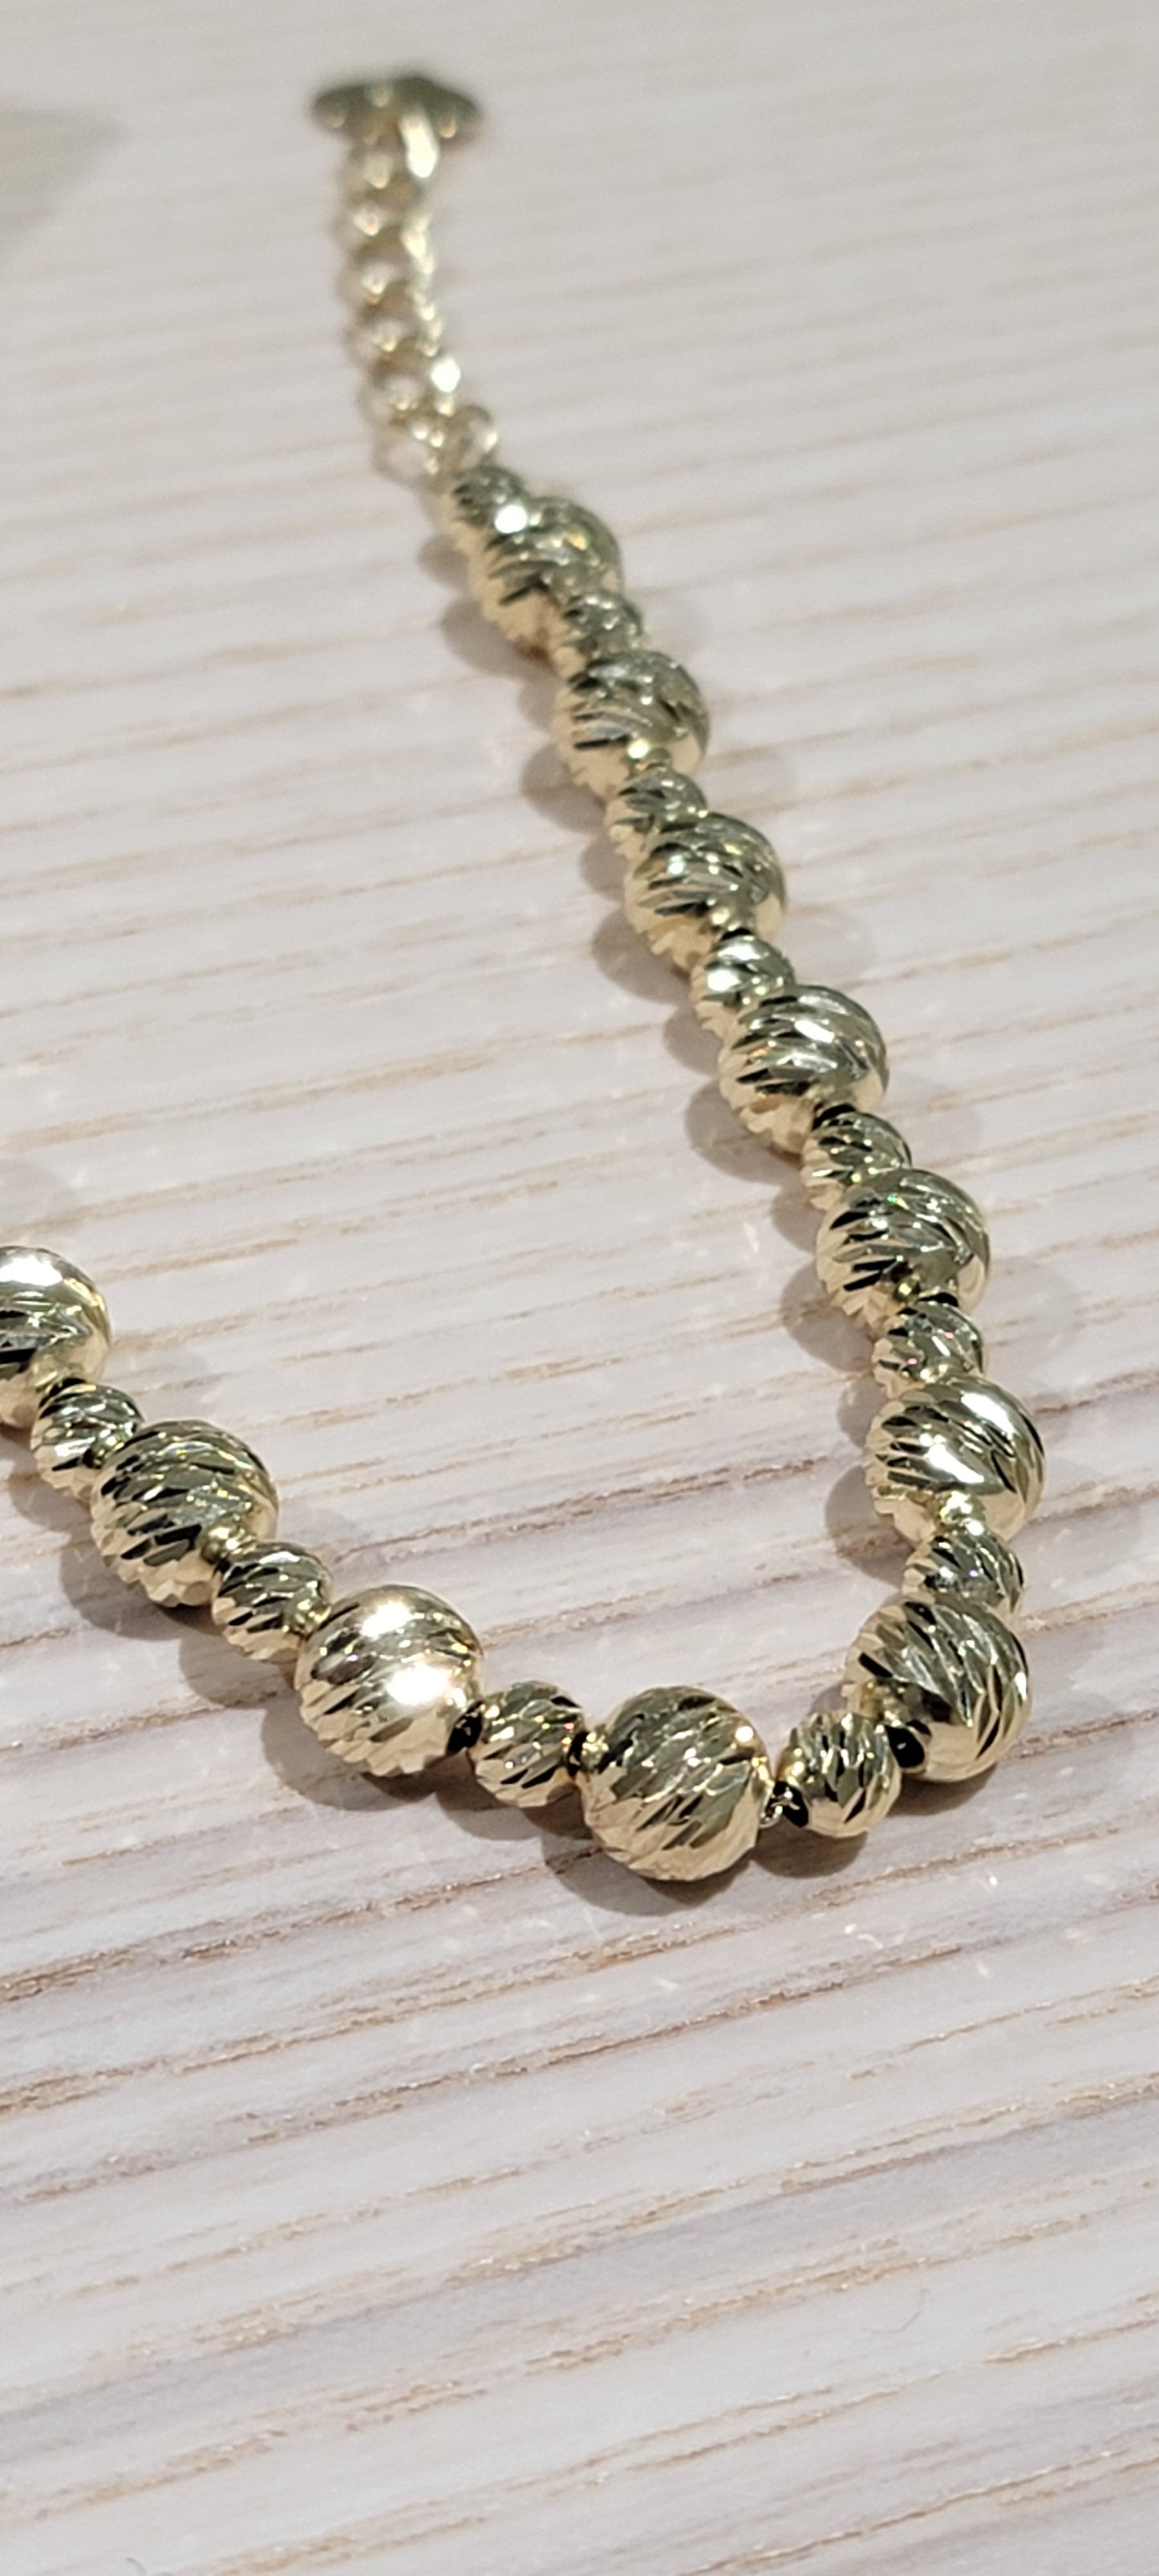 14kt gold fancy bracelet adjustable from 7 inch to 9 inches